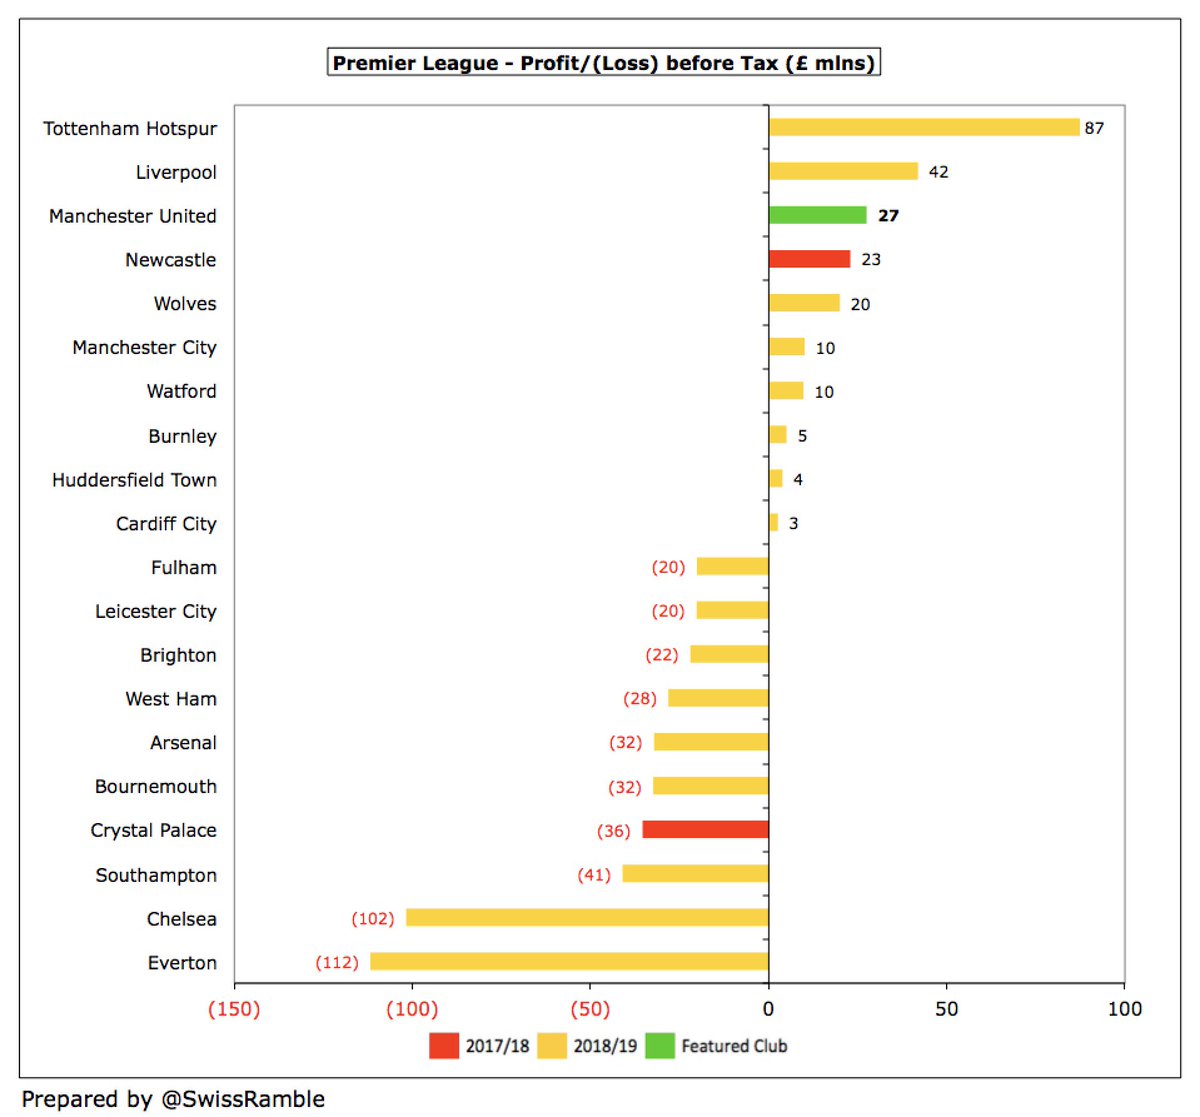 It is worth noting that  #MUFC £26m profit over 9 months in 2019/20 is better than every other Premier League club’s financial result last season, except for  #THFC and  #MUFC. Everything is relative – and half the clubs in the top flight lost money even before Coronavirus.